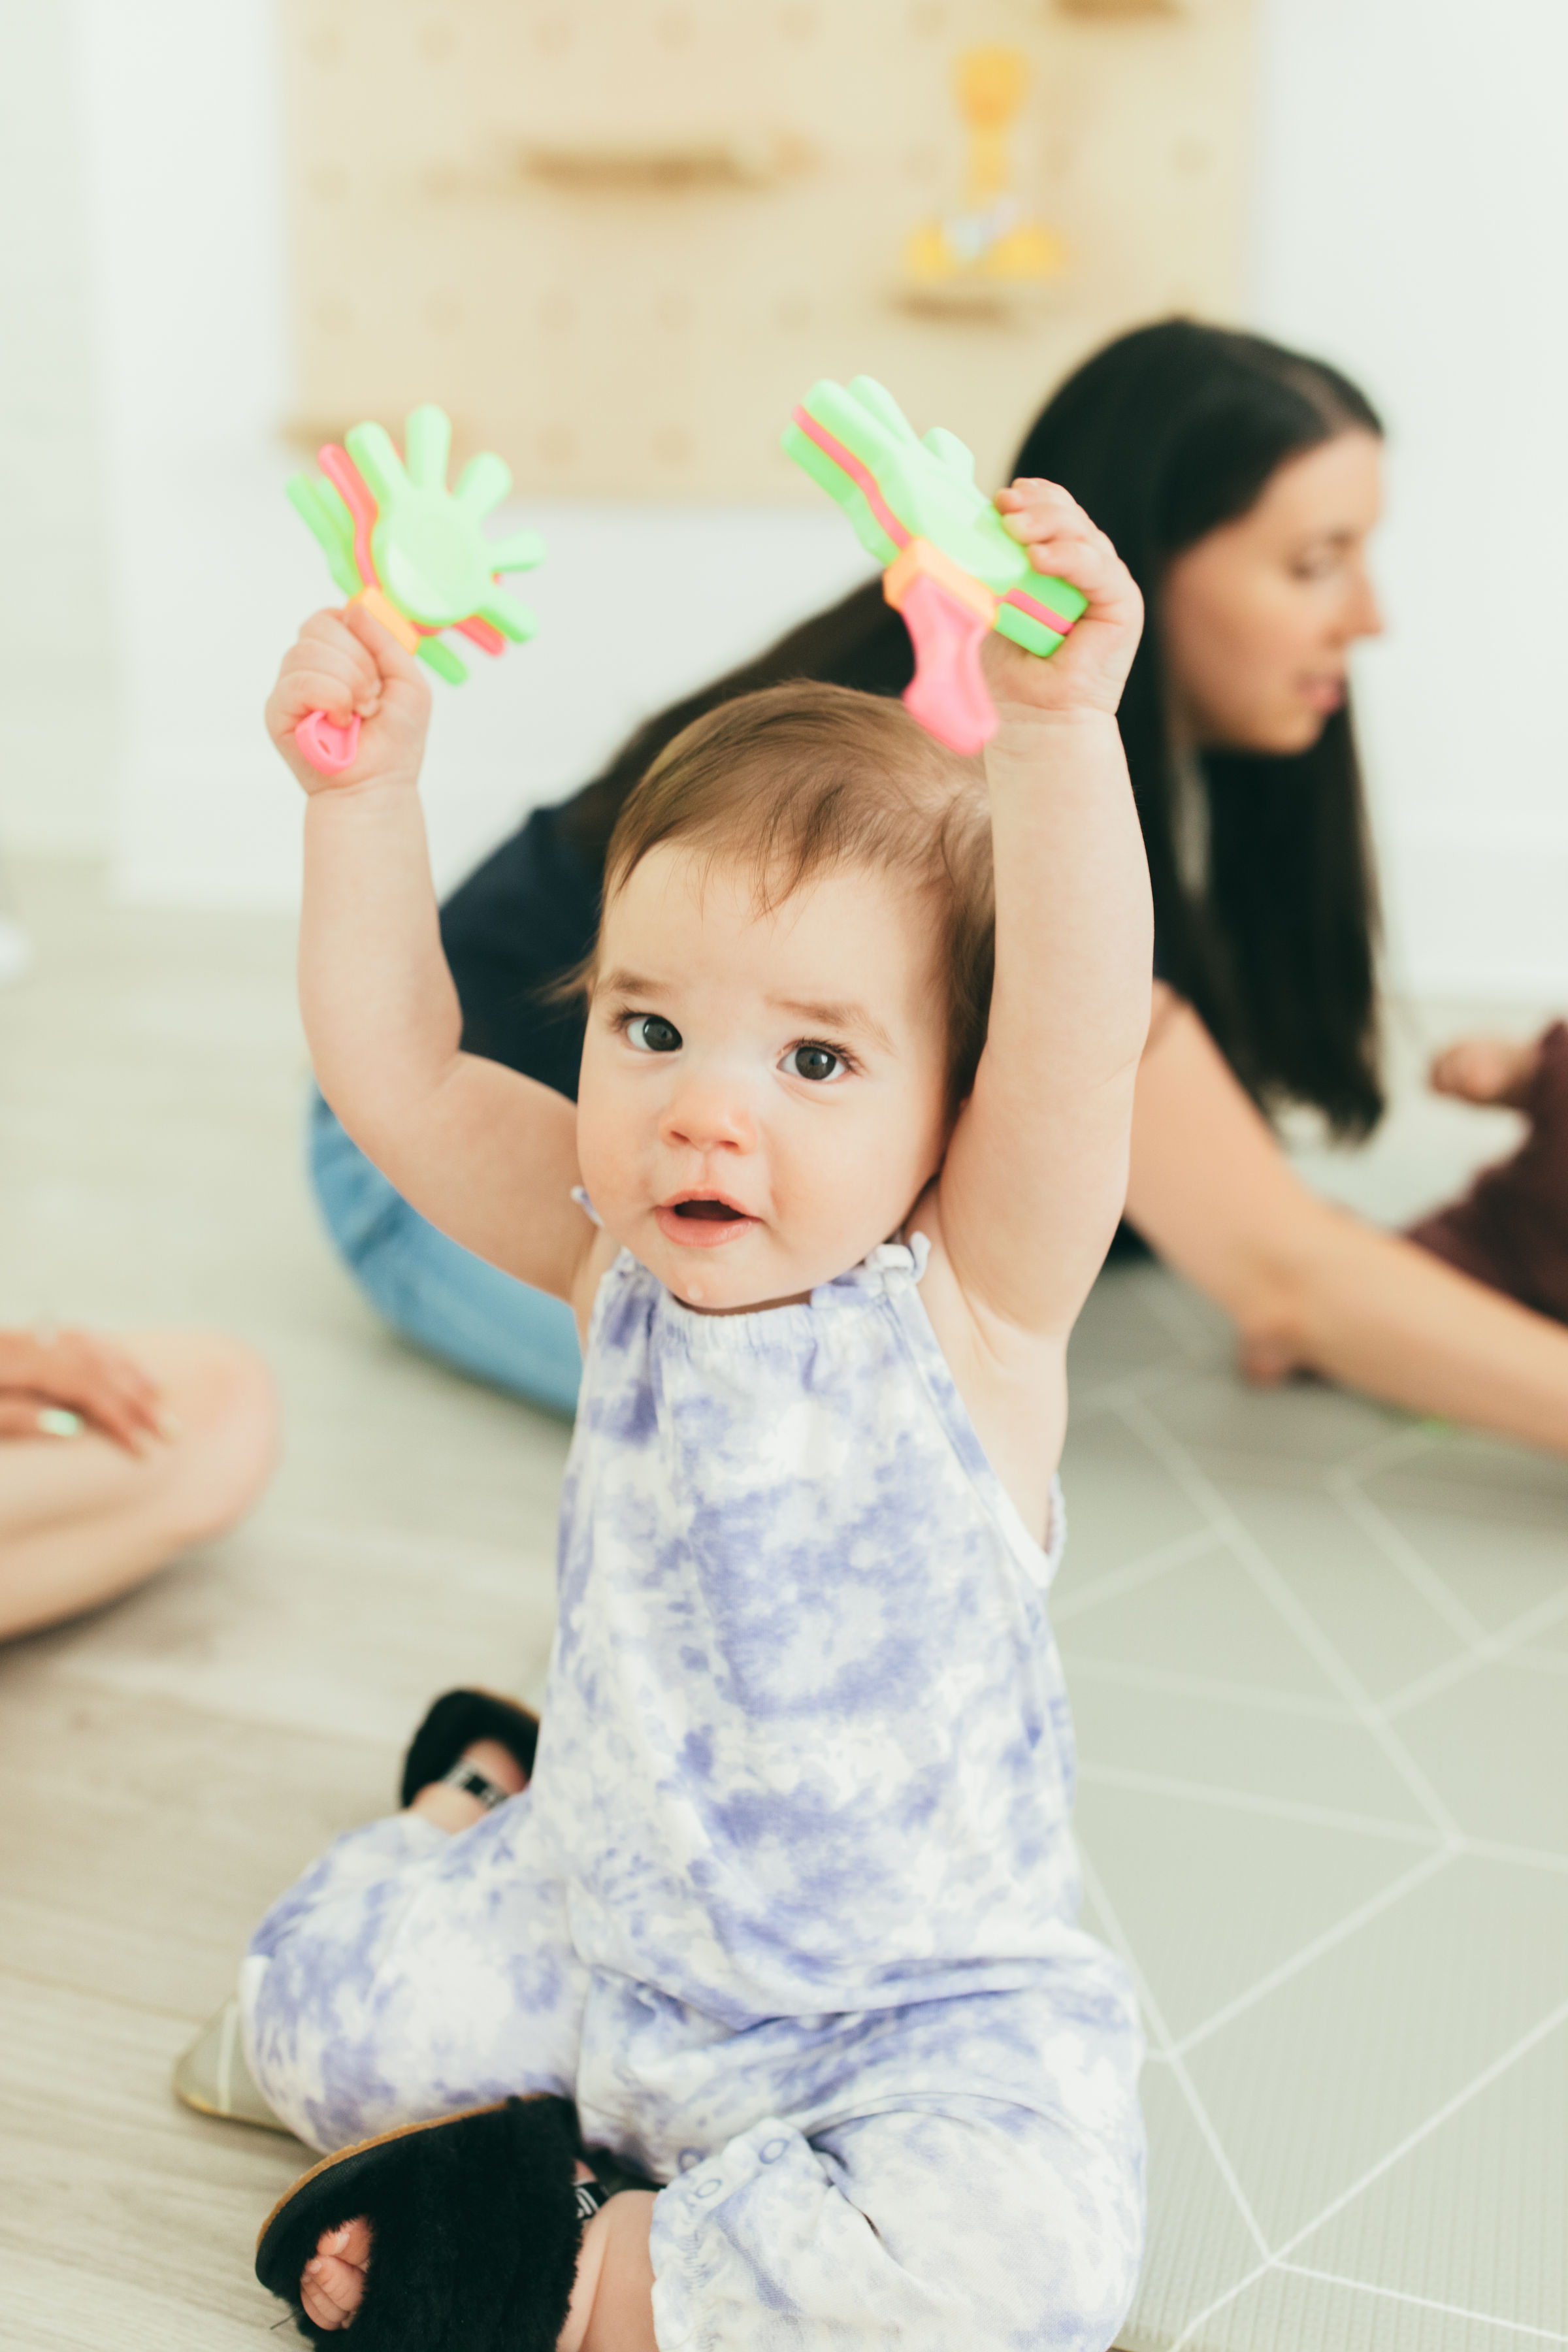 A baby holds up our hello hands toy